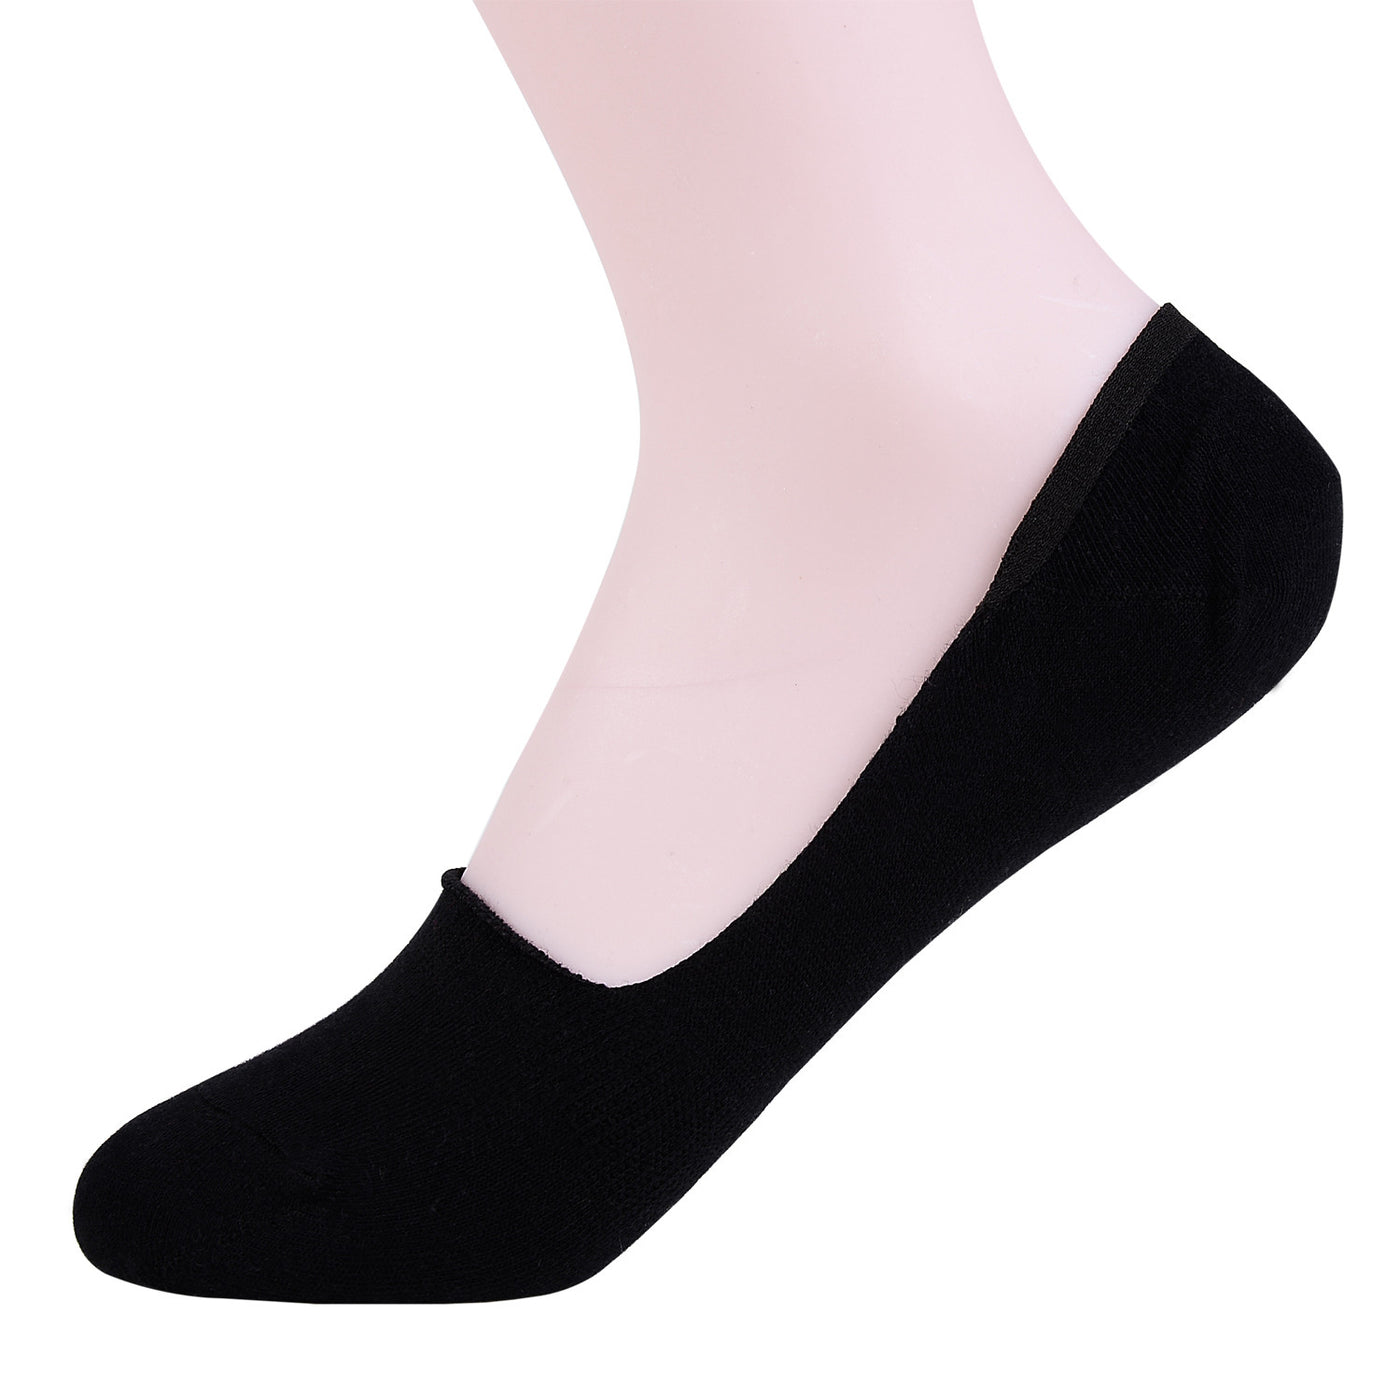 2 Pairs Finest Combed Cotton Invisible Socks Plain - Black